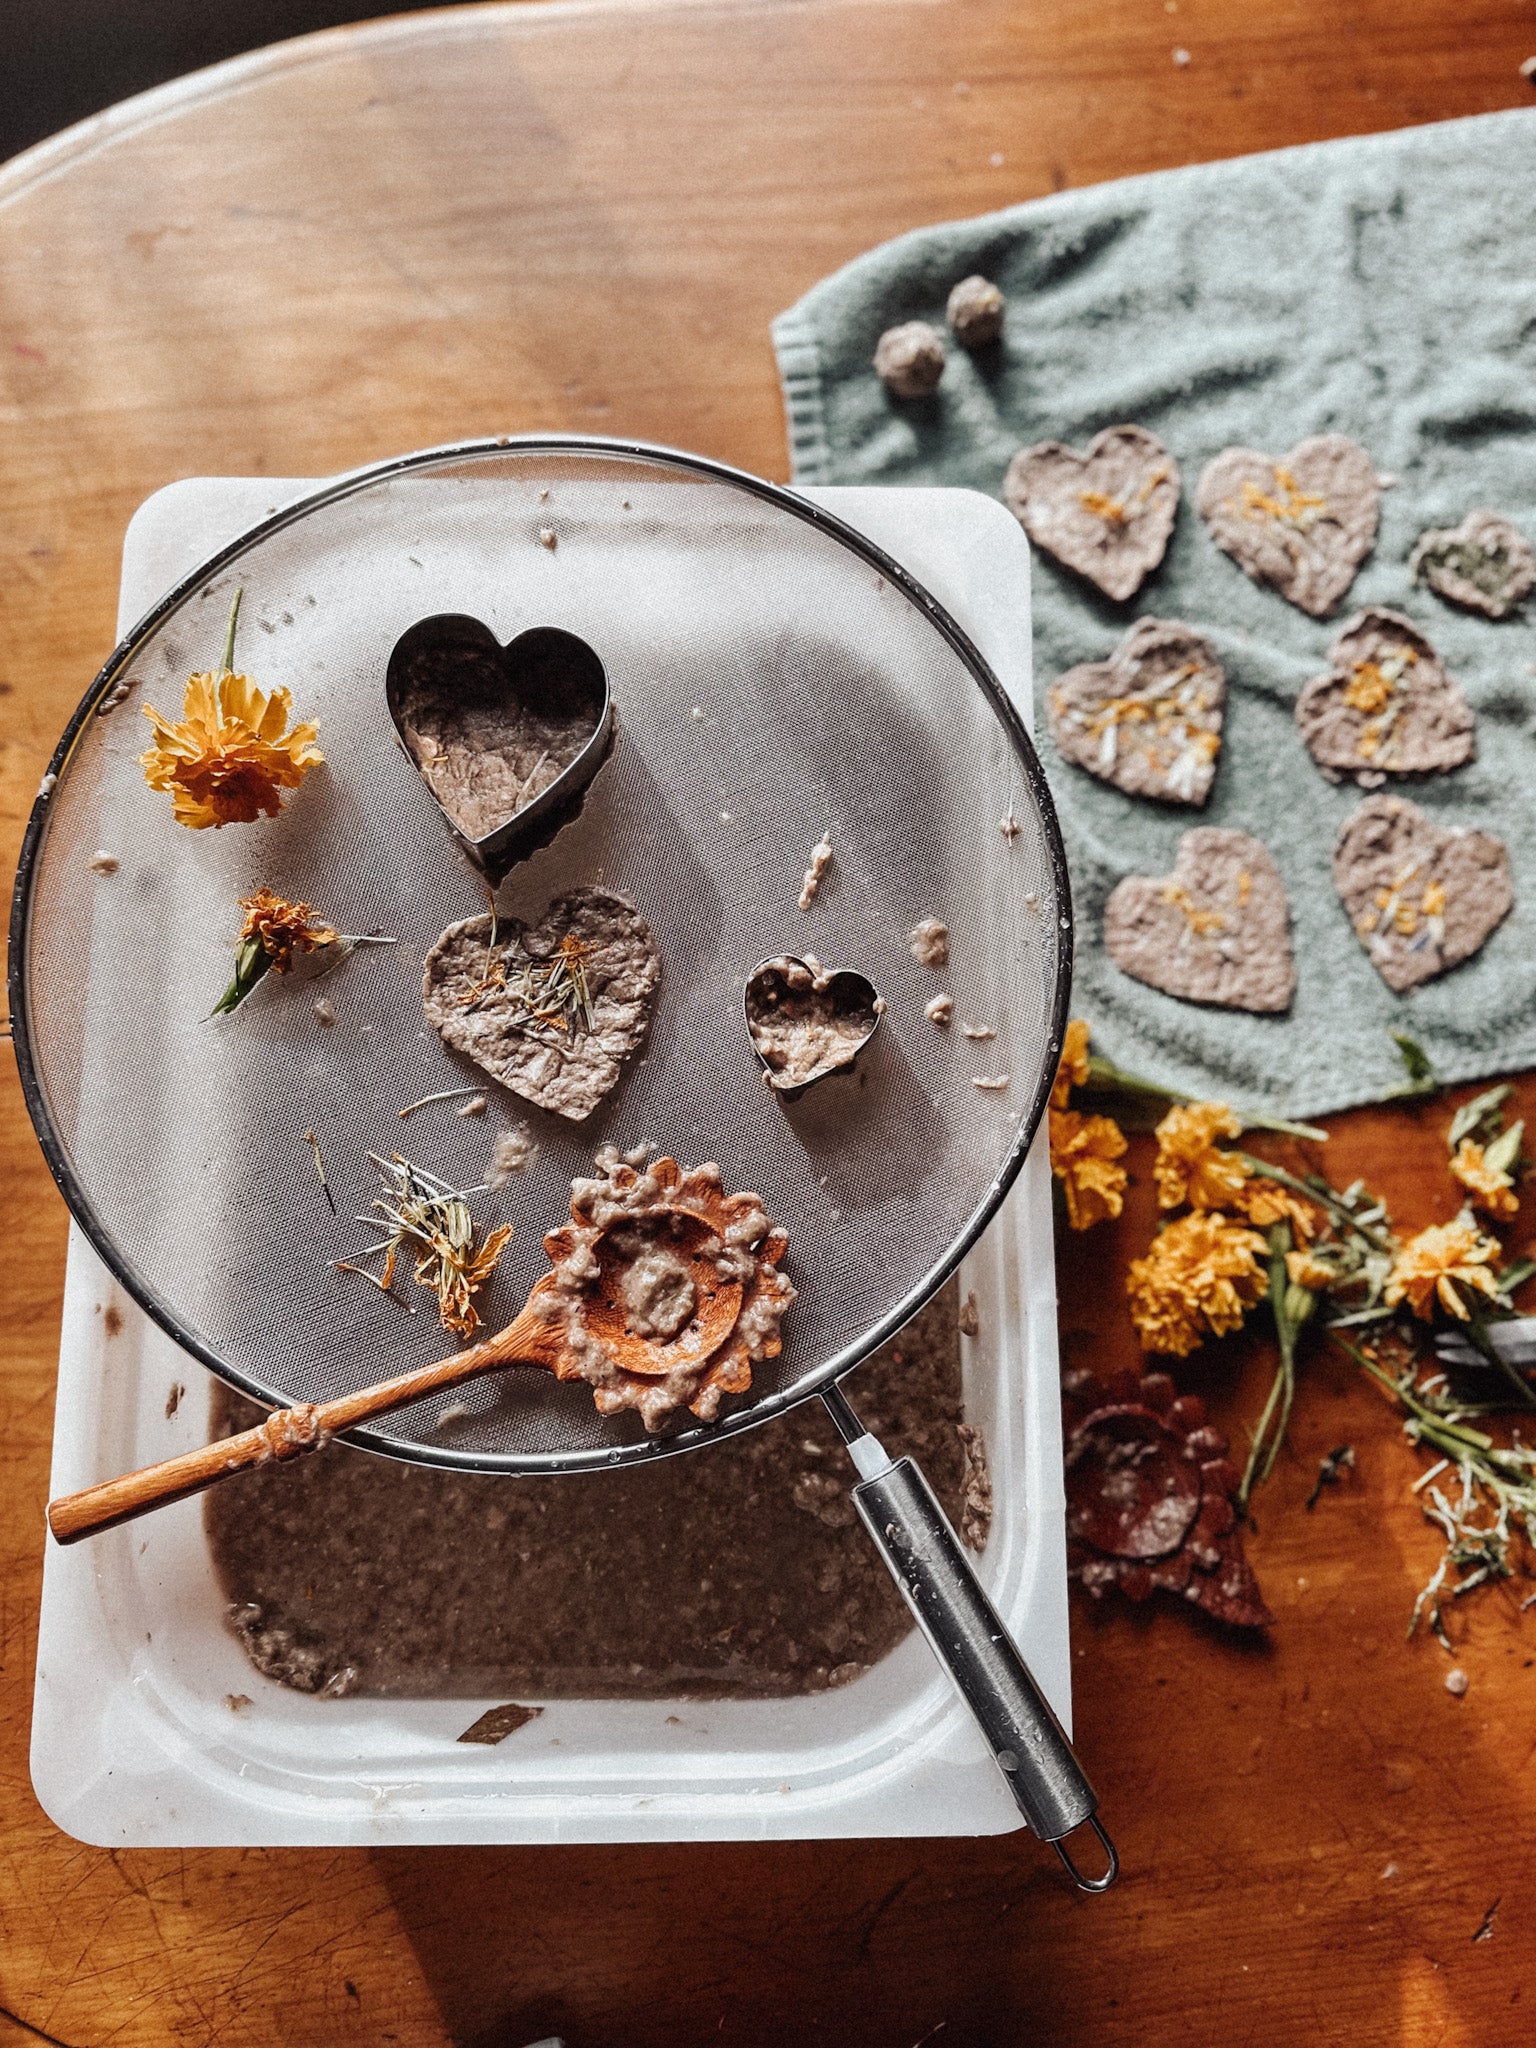 DIY Marigold Seed Paper Hearts: A Fun and Eco-Friendly Mother's Day Craft